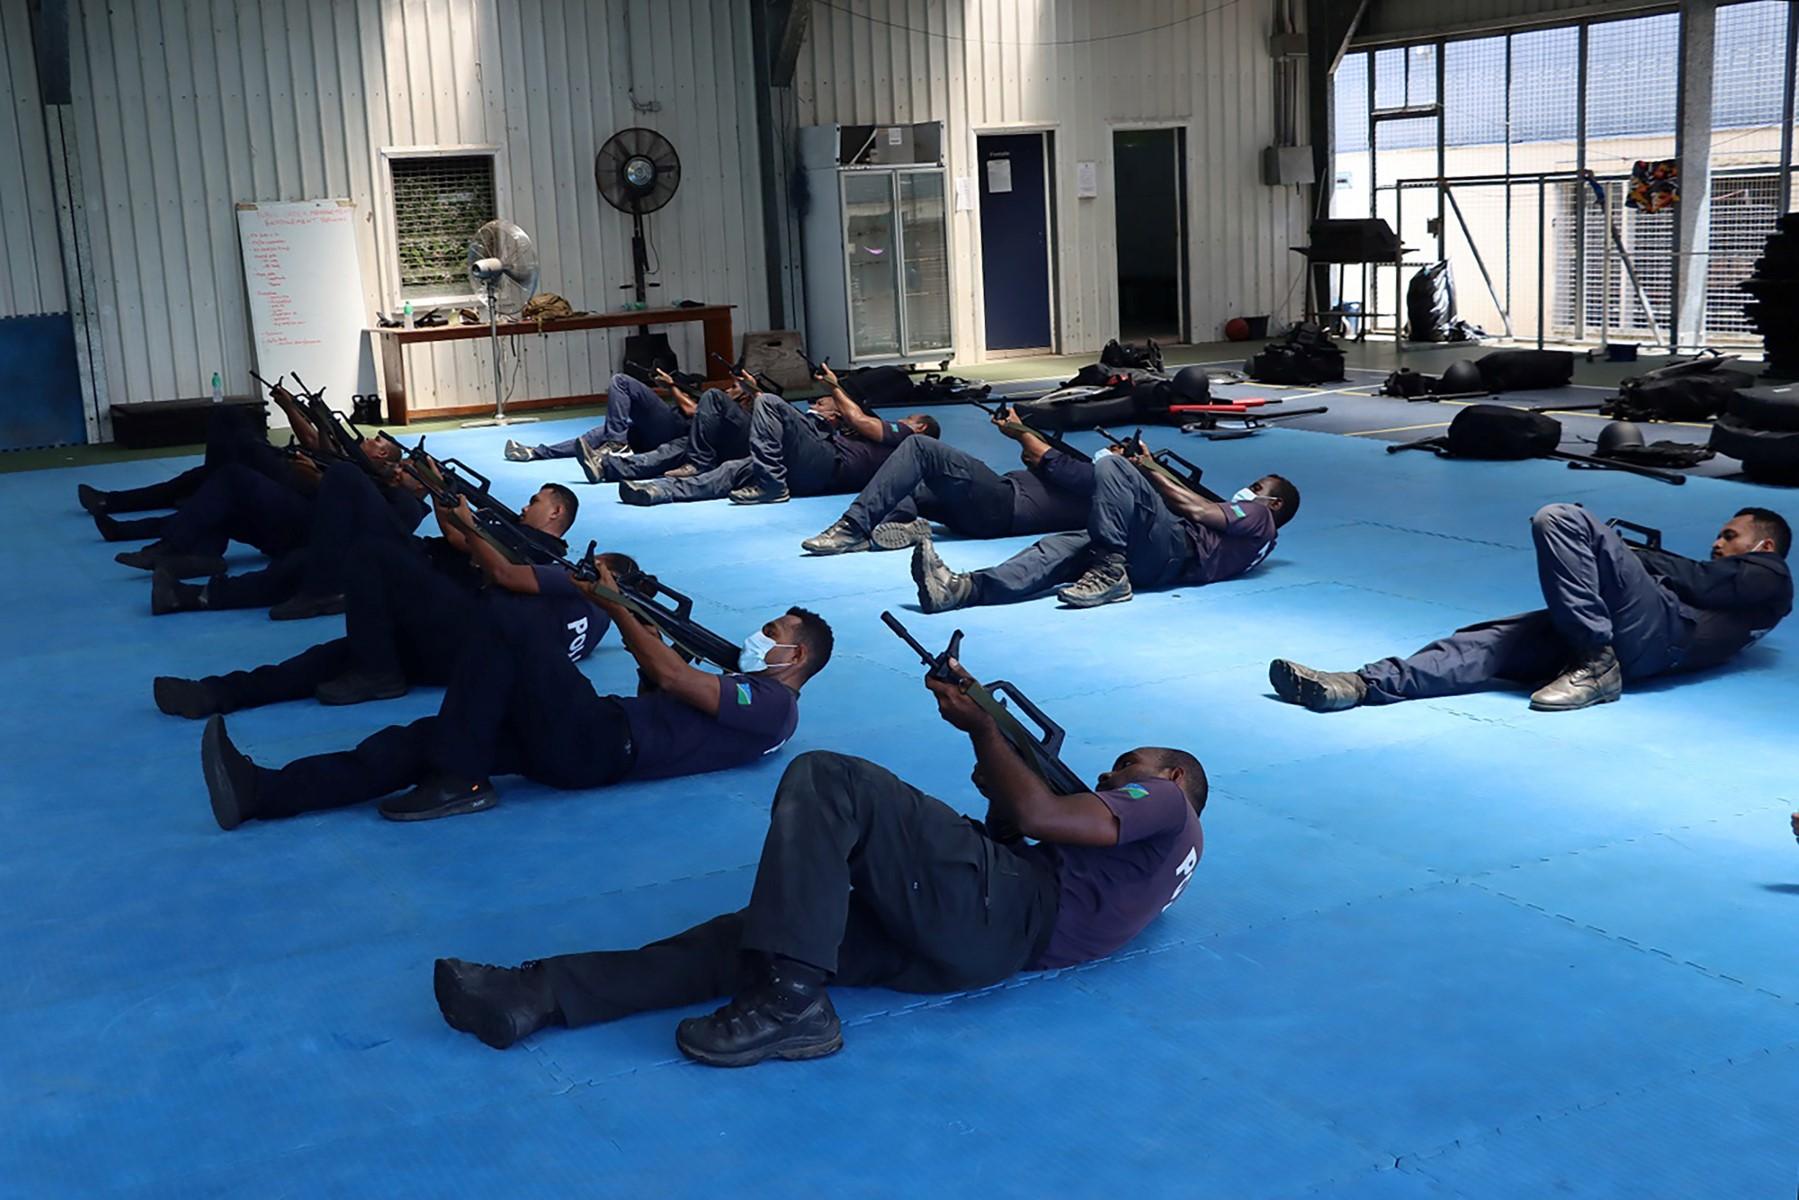 An undated handout photo released on March 29 by the Royal Solomon Islands Police Force (RSIPF) shows China Police Liason Team officers training local RSIPF officers in drill, unarmed combat skills, advanced usage of long sticks, round shields, tactical batons, T-shape baton, handcuffs, basic rifle tactics and crowd control. Photo: AFP